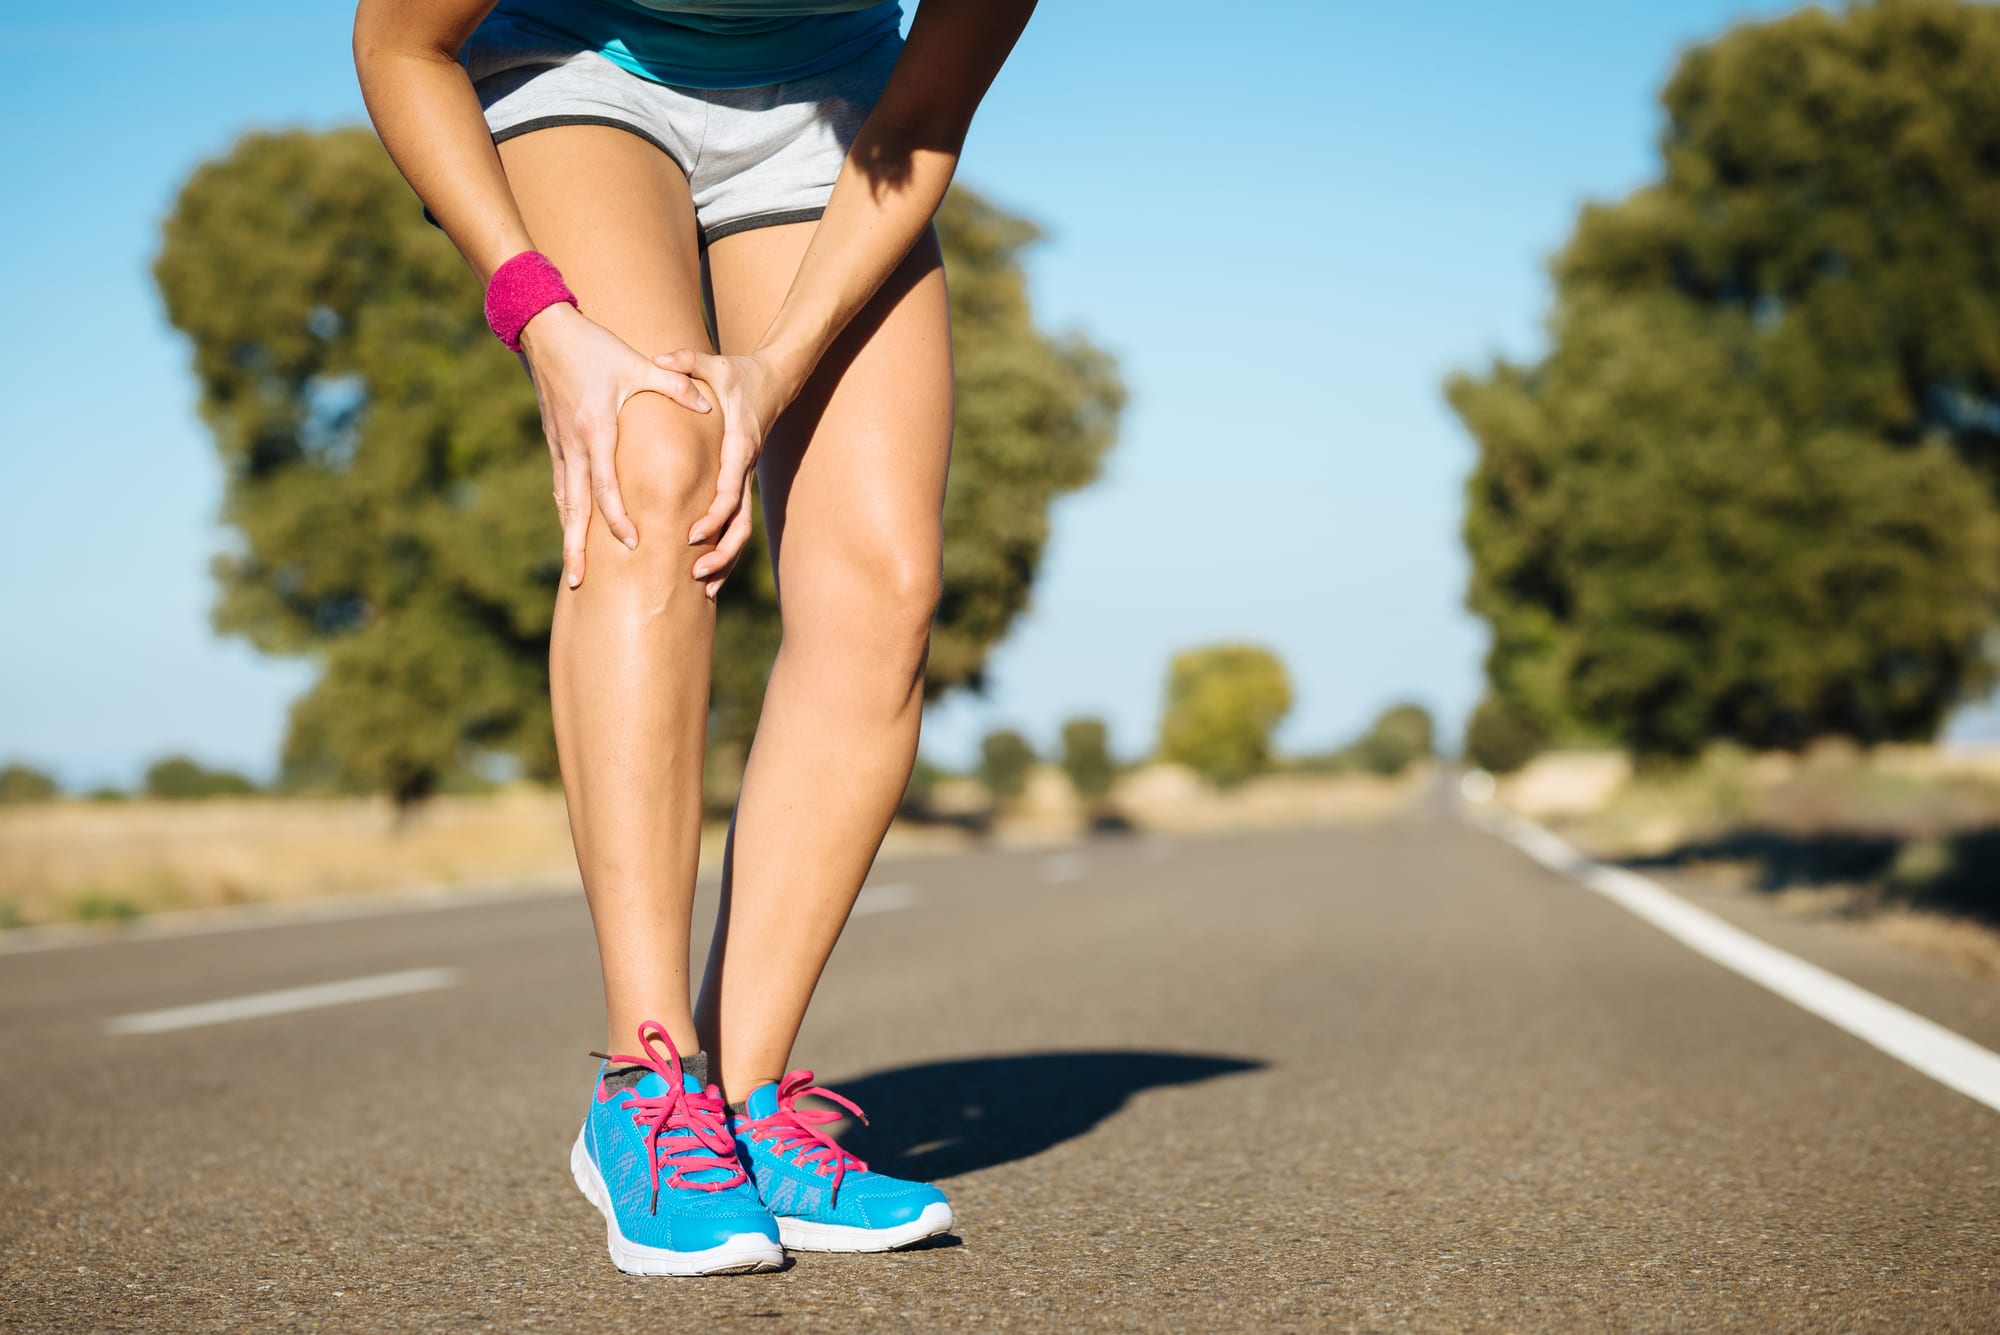 Runner with Knee Injury and Knee Pain